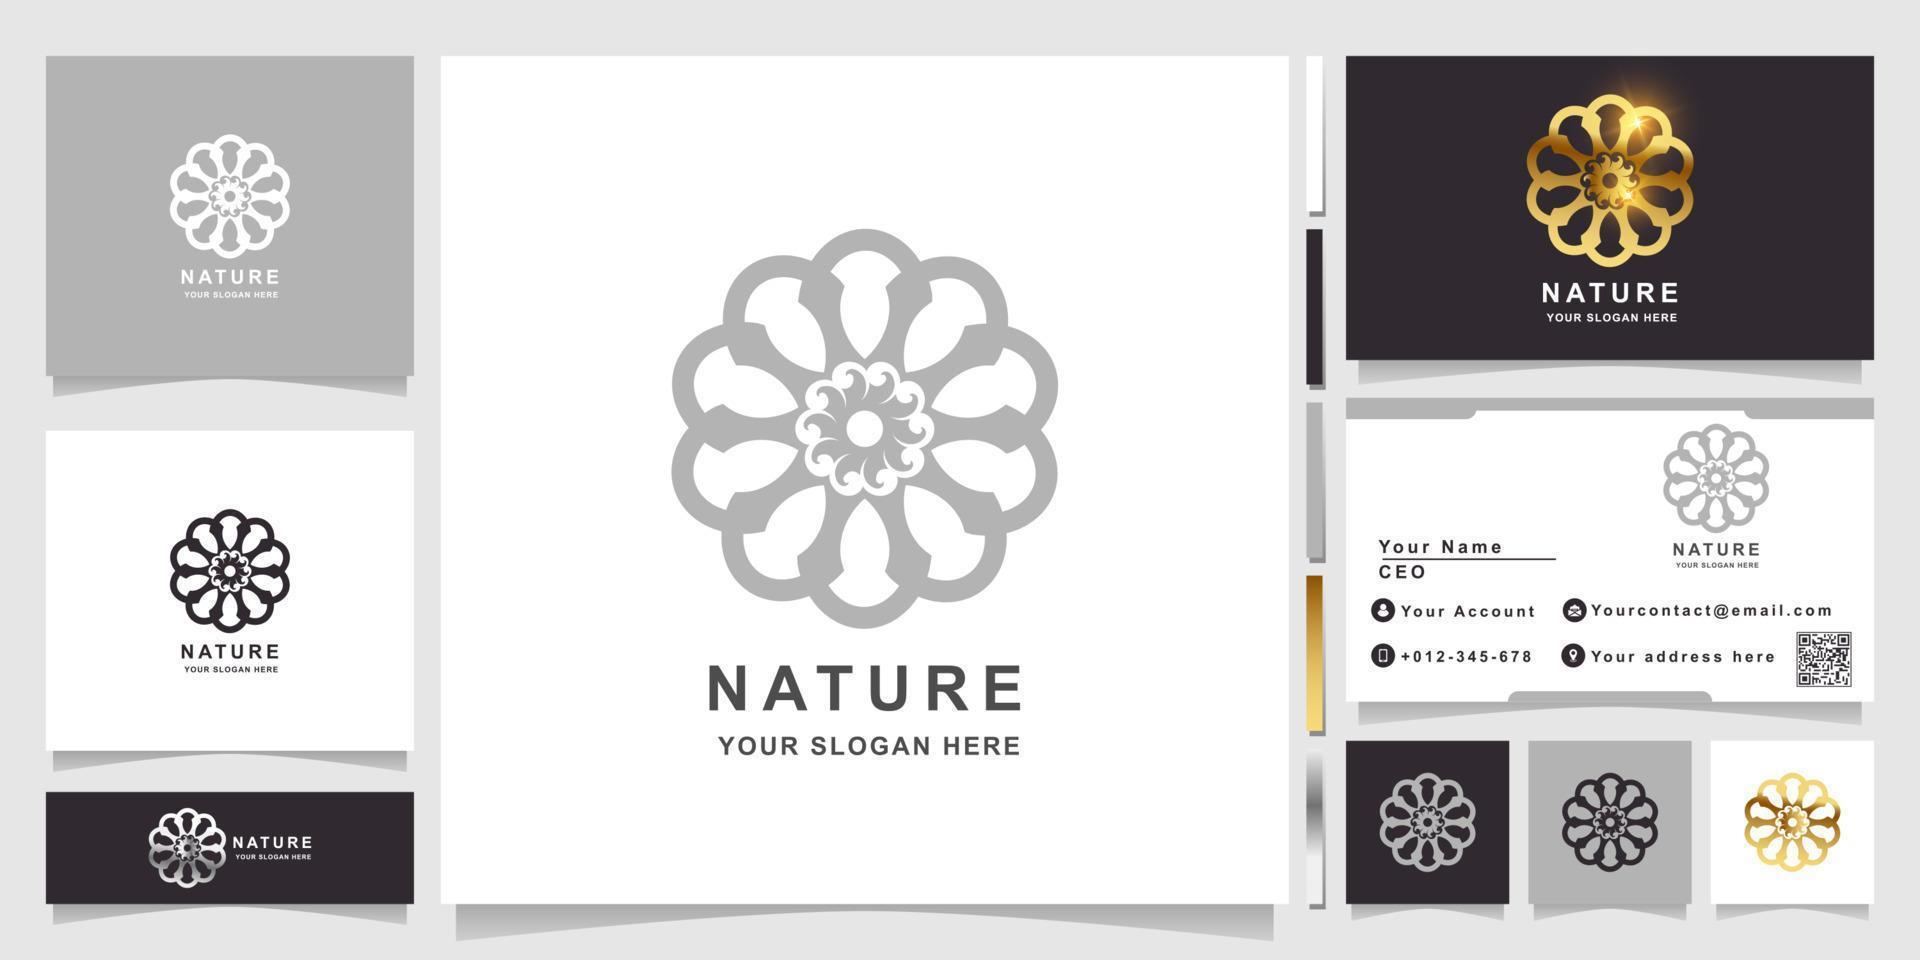 Nature, flower, boutique or ornament logo template with business card design. Can be used spa, salon, beauty or boutique logo design. vector